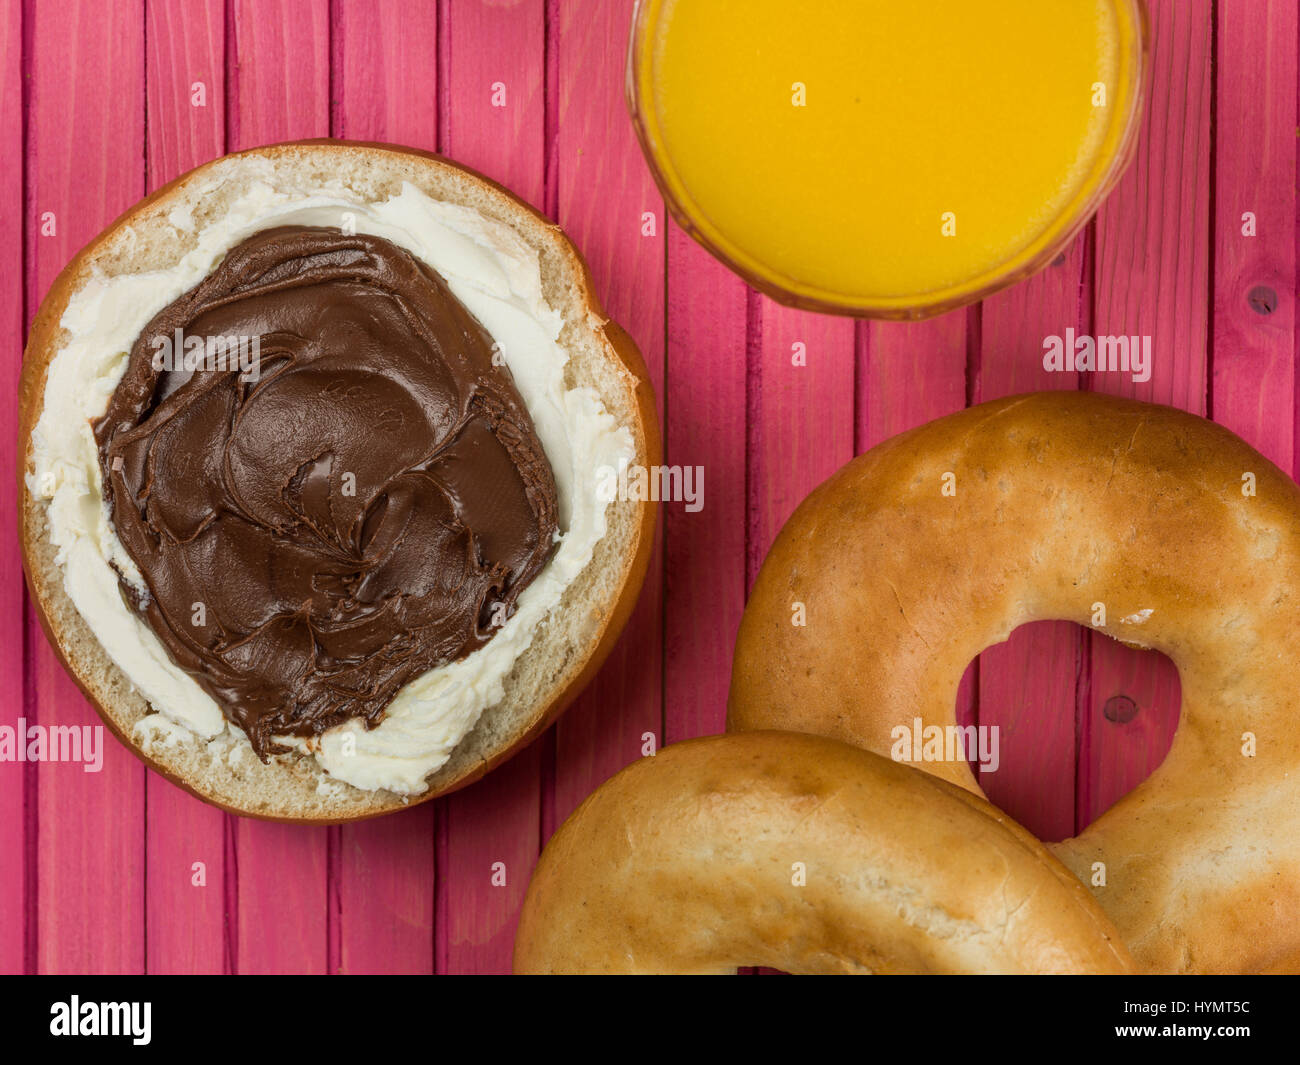 Chocolate Spread and Cream Cheese Bagel Against a Pink Background Stock Photo